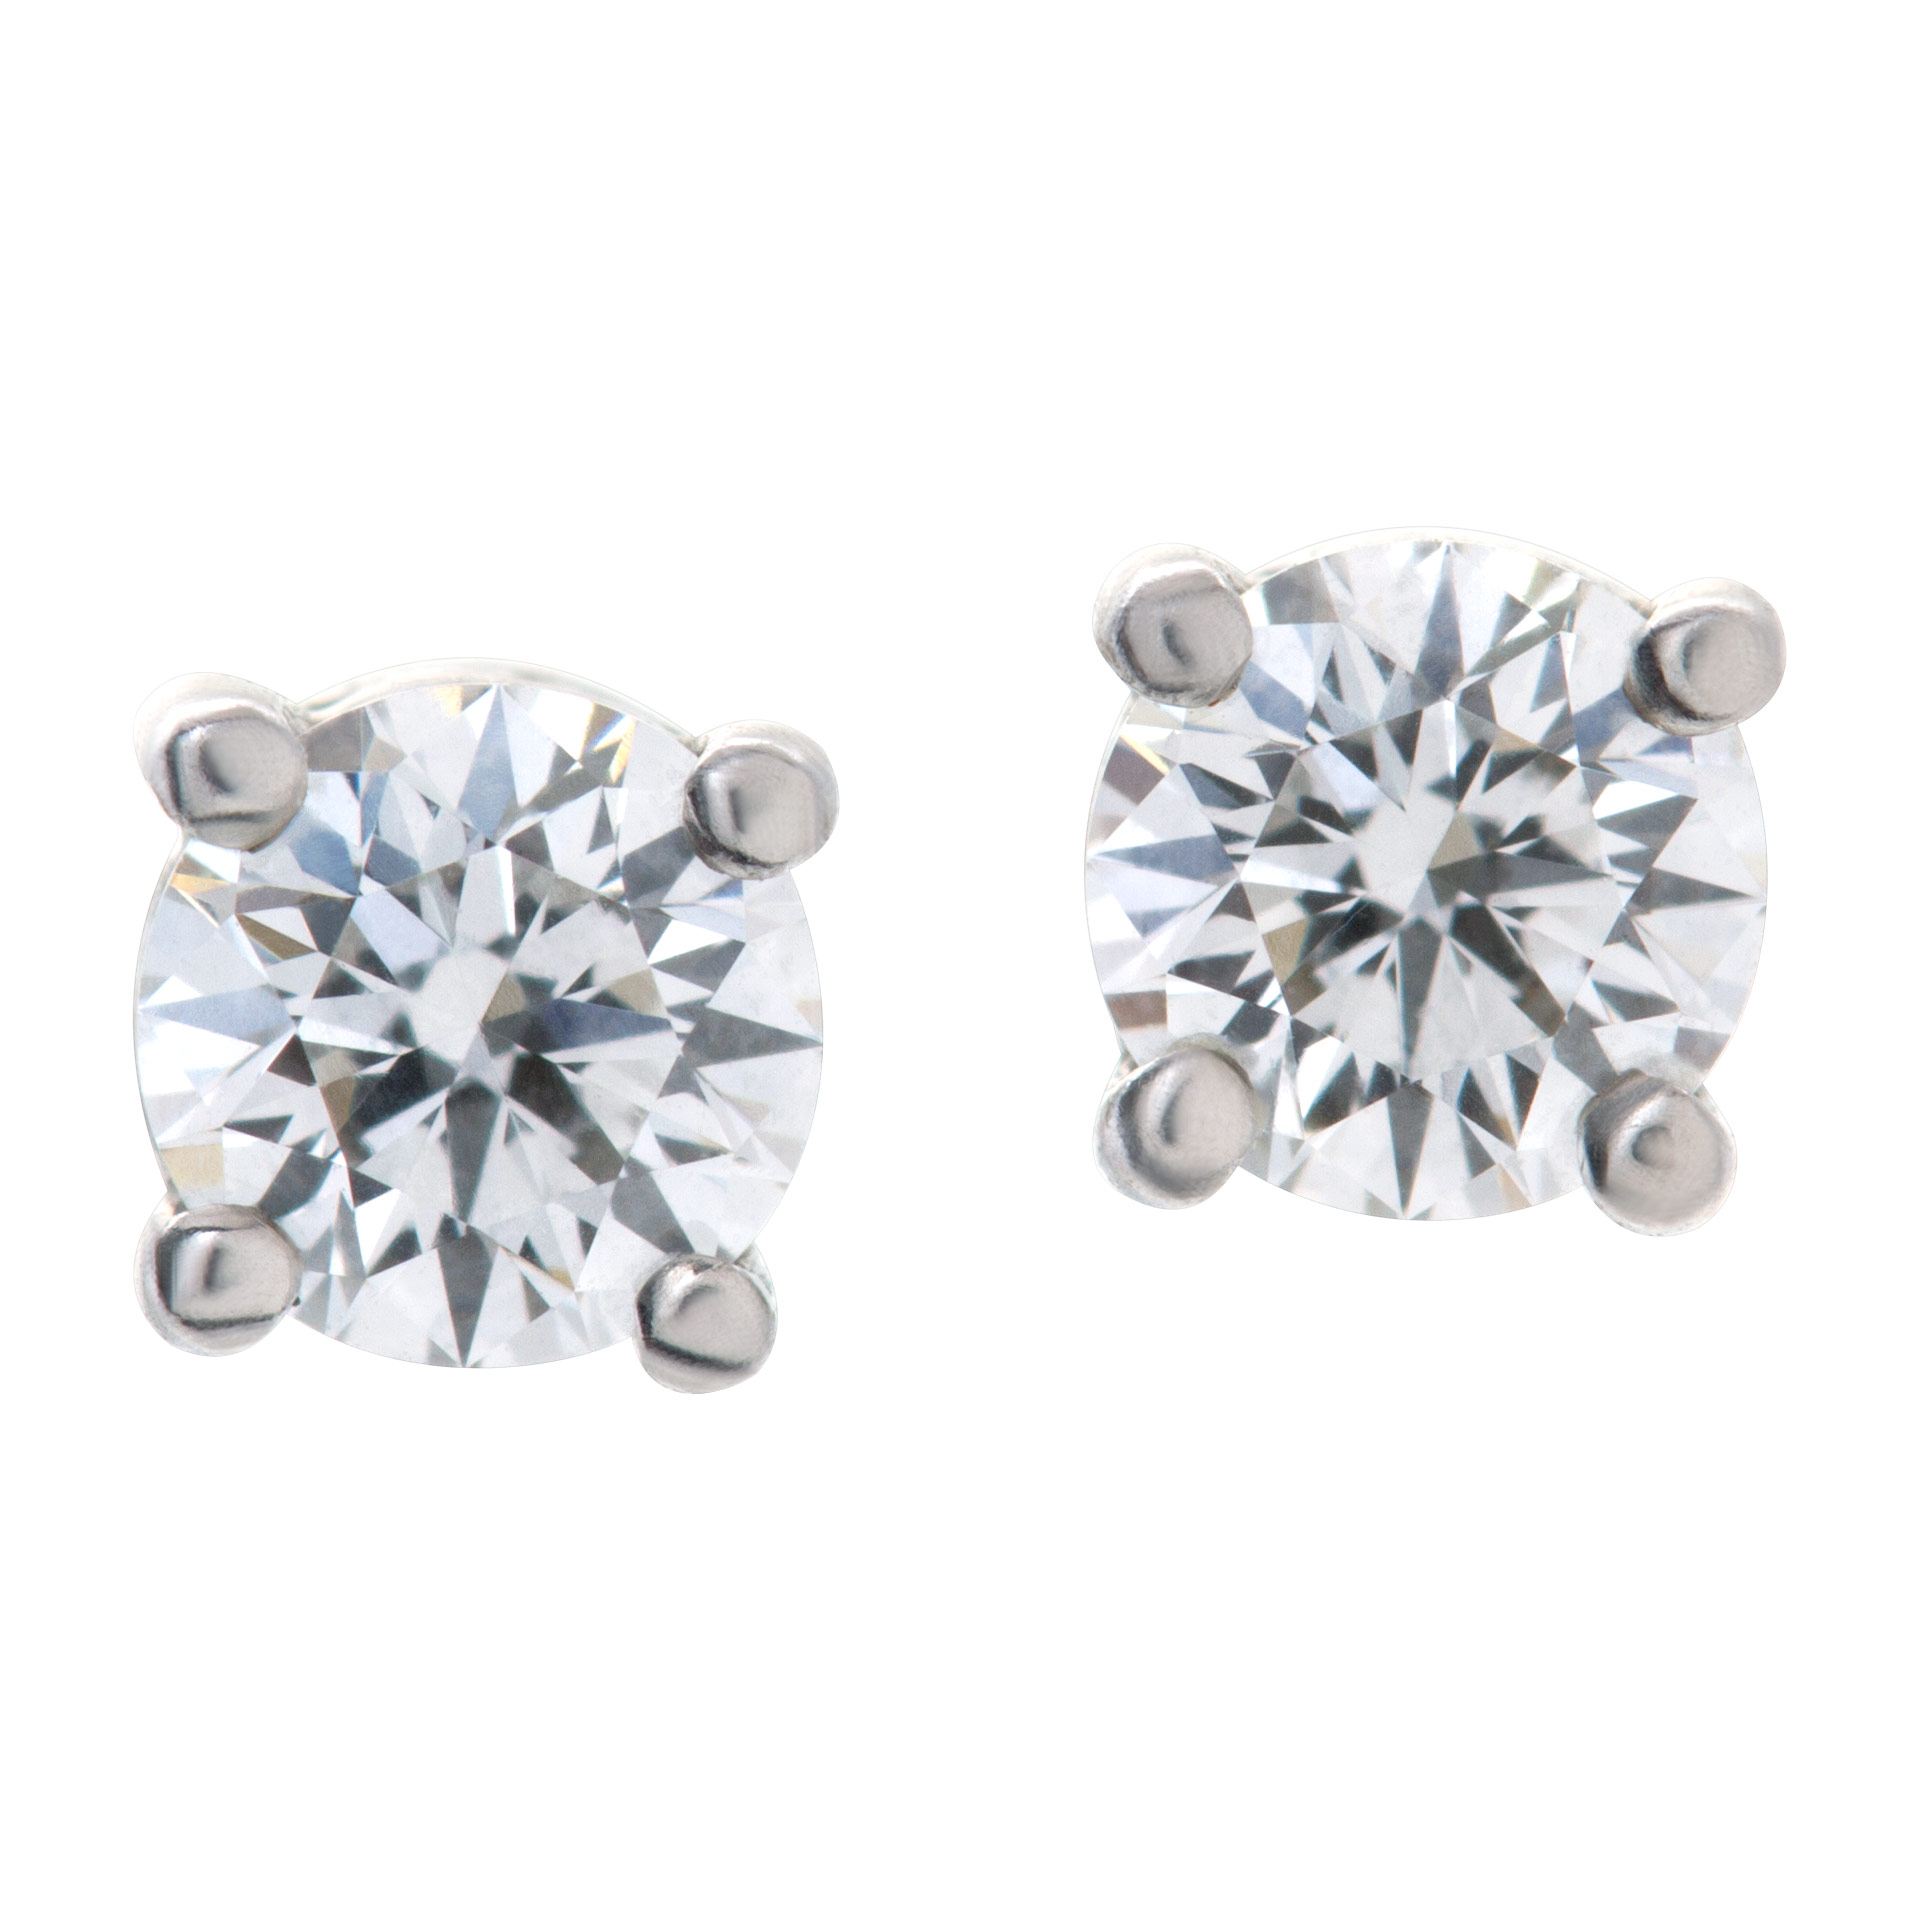 Tiffany Solitaire diamond earrings in 18k white gold image 1